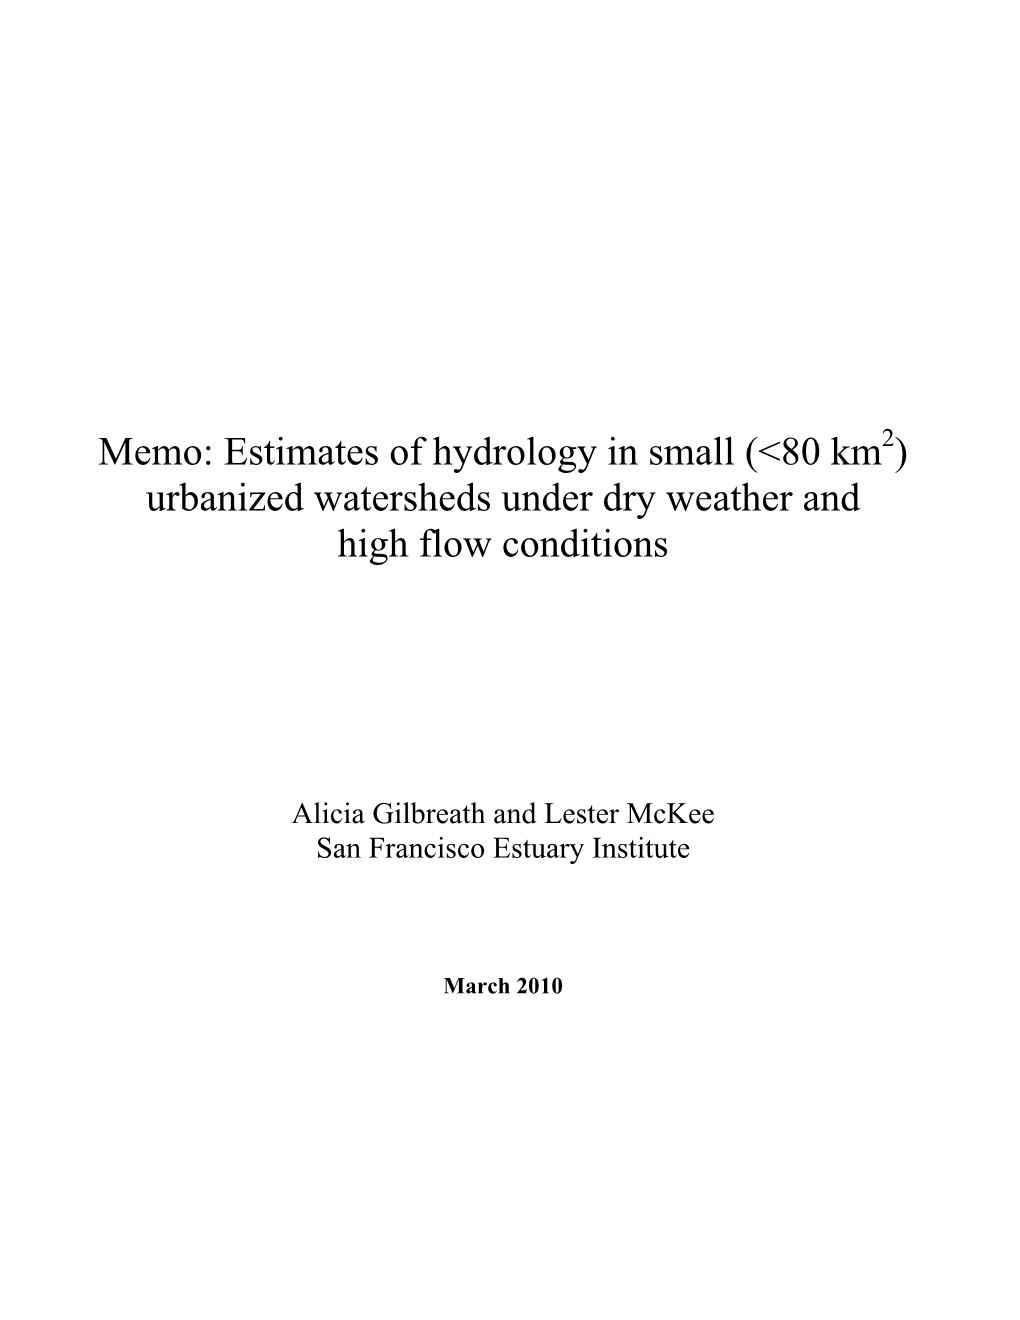 Estimates of Hydrology in Small (&lt;80 Km ) Urbanized Watersheds Under Dry Weather and High Flow Conditions